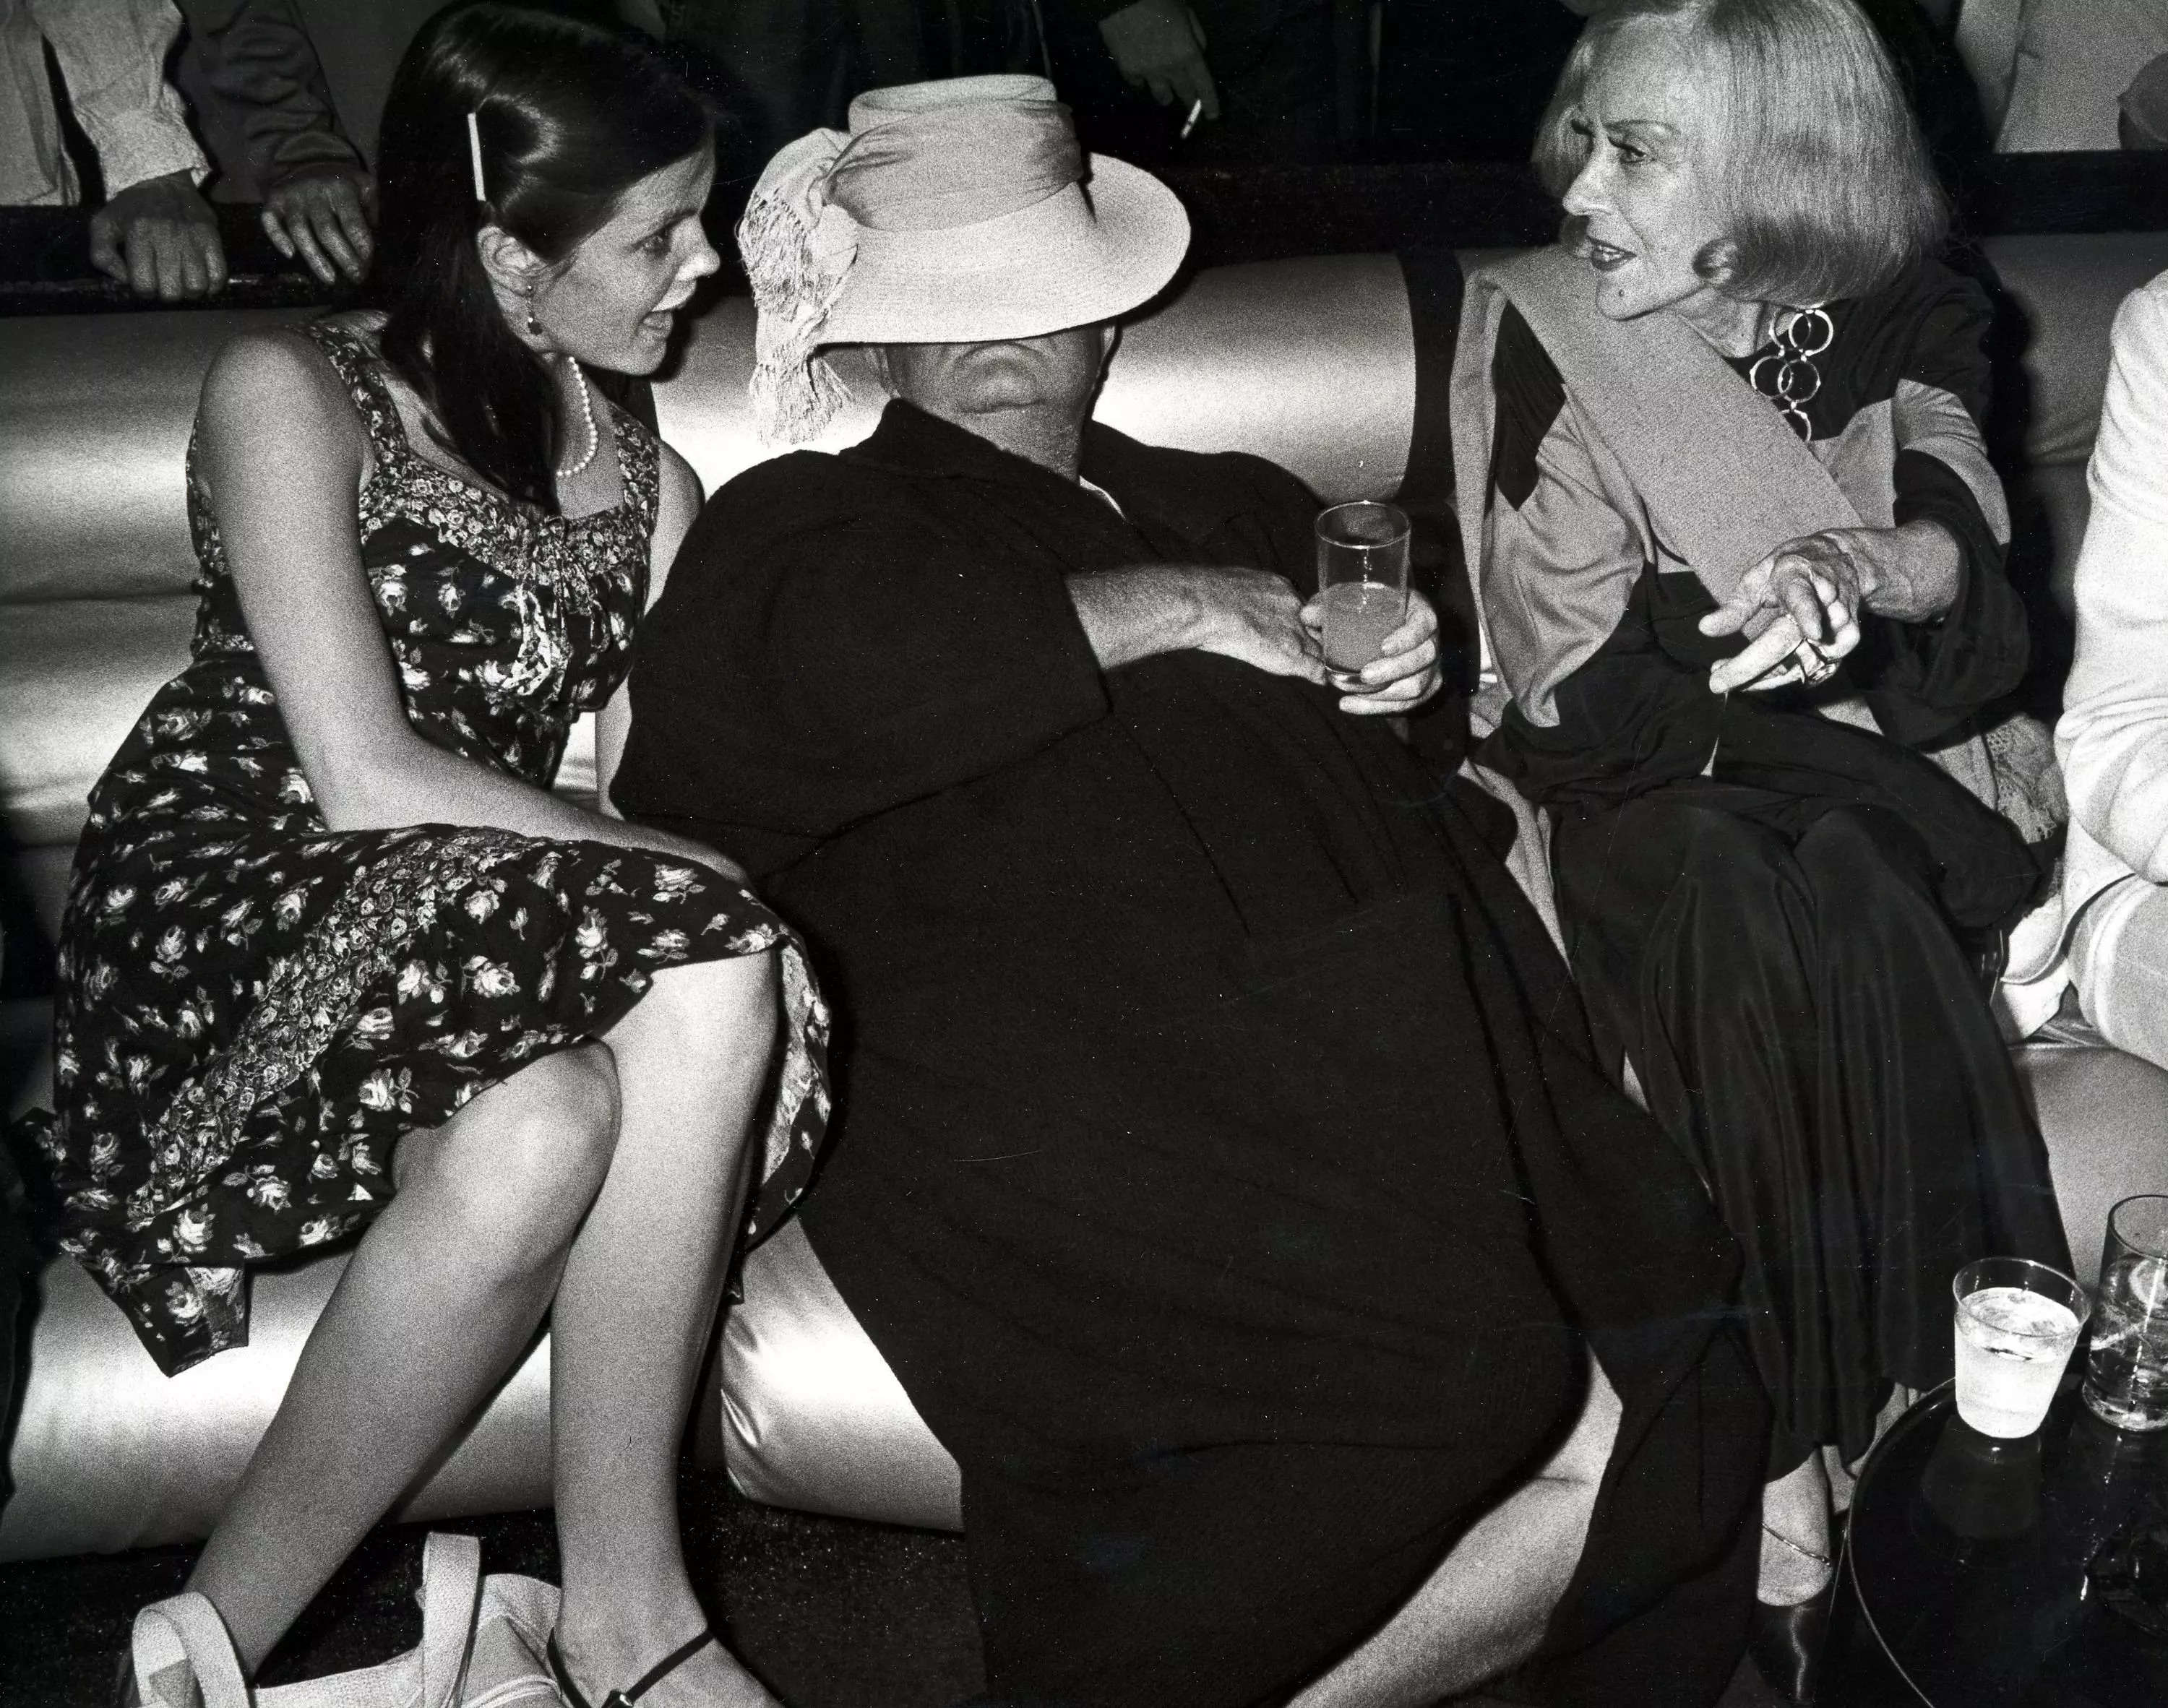 Kate Harrington talking to Gloria Swanson at a Studio 54 party in 1978, while Truman Capote rests in between them.